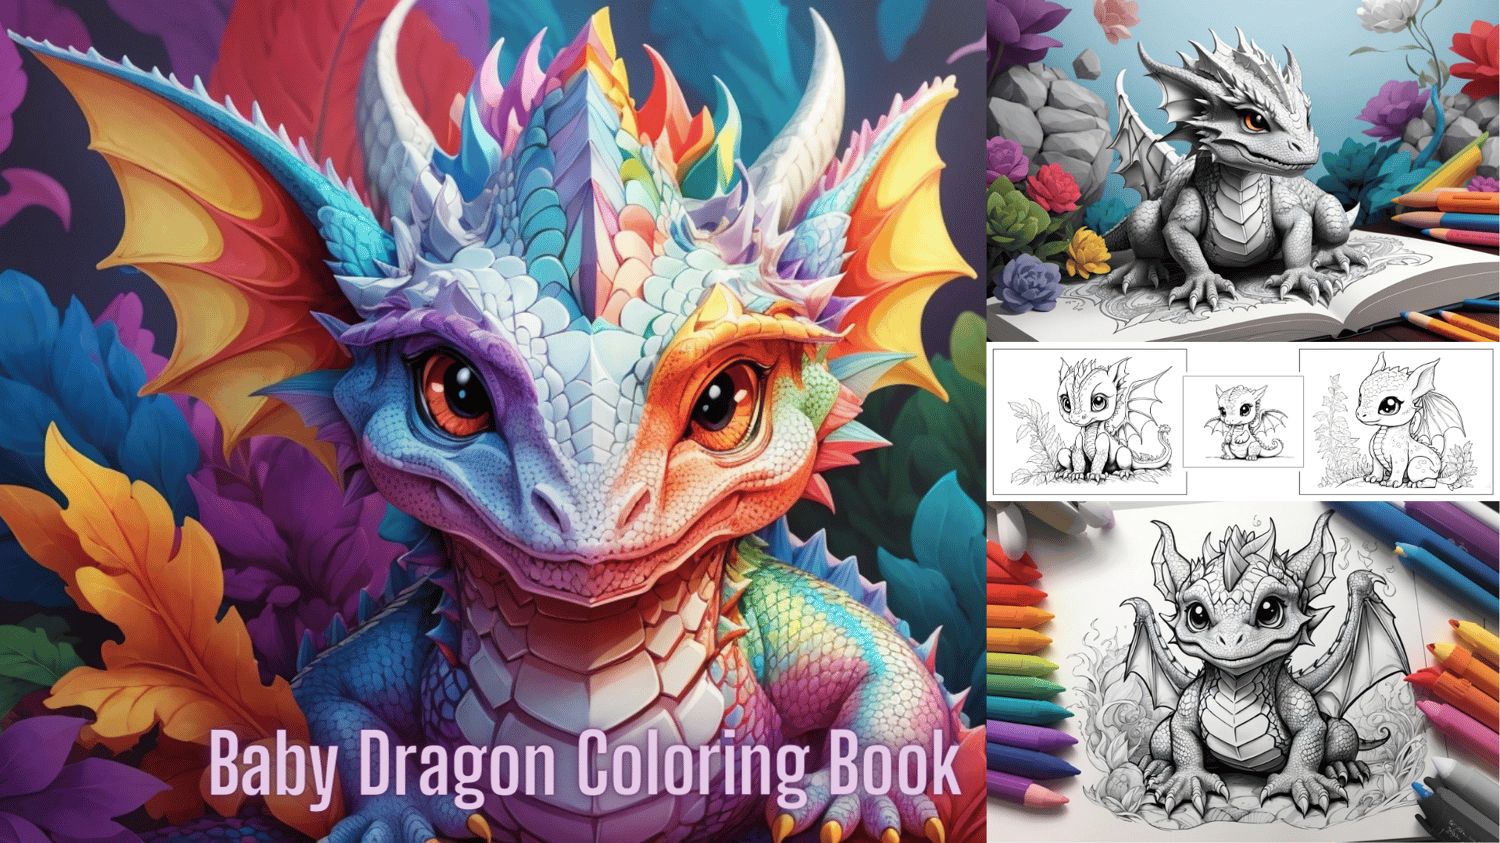 Enchanting Creatures: A Magical Animal Coloring Book for Adults